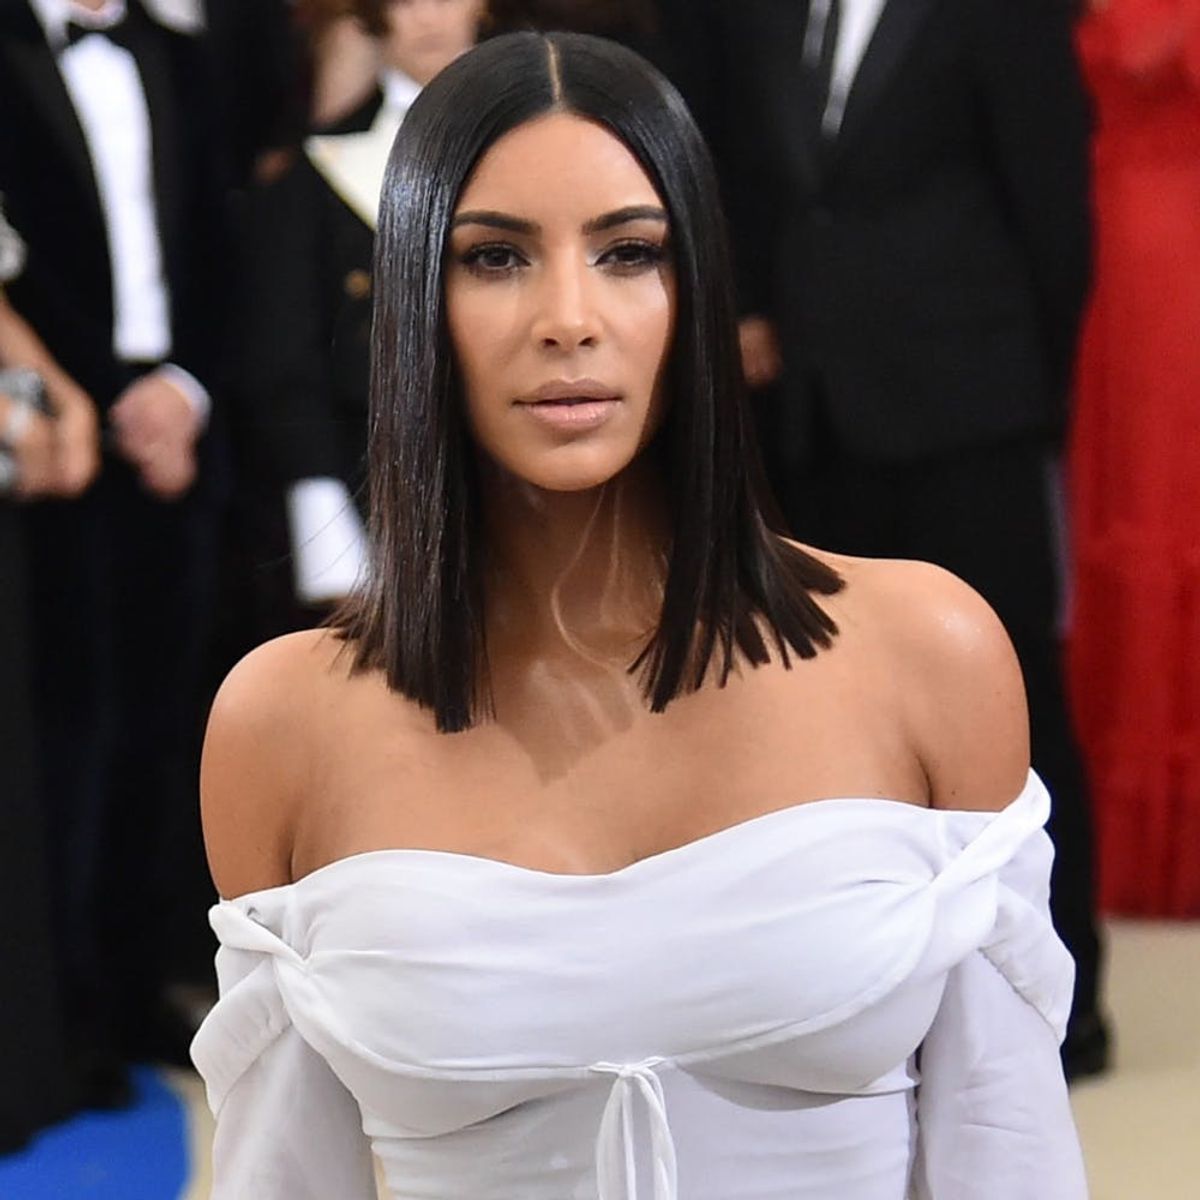 Kim Kardashian Opens Up About a Miscarriage Scare With North